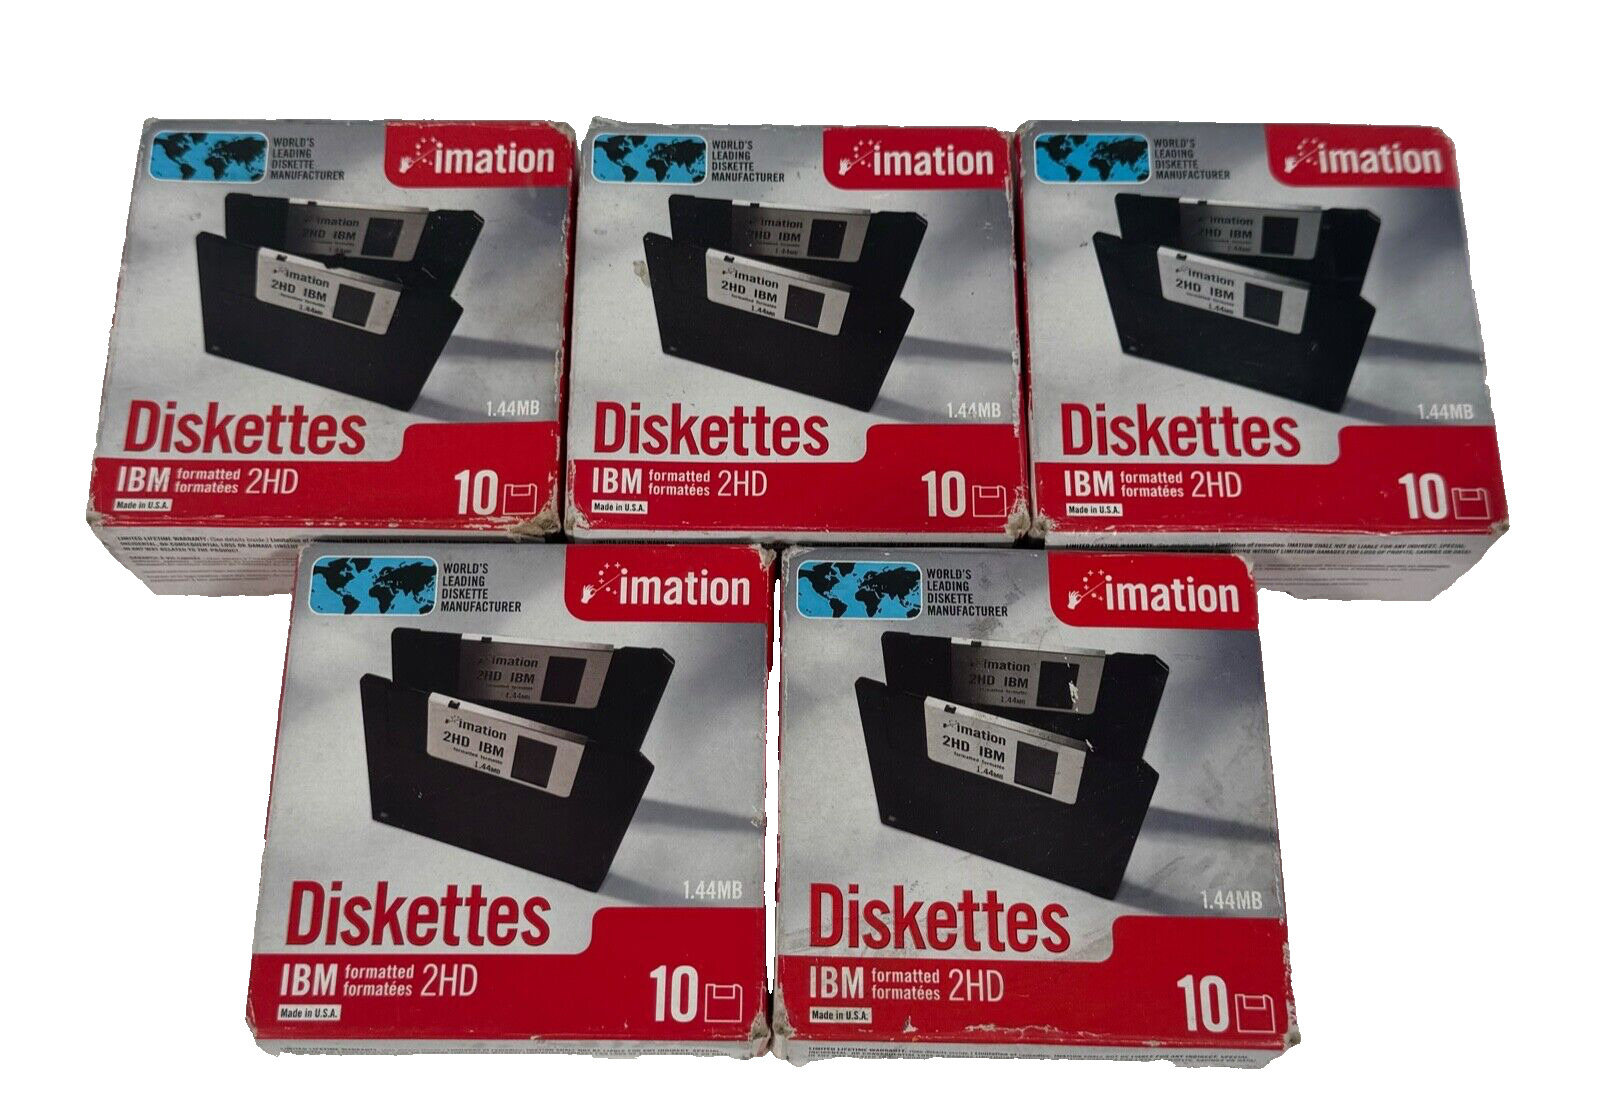 New Lot of 5 Boxes Imation 1.44MB 2HD Diskettes 10 Pack (50 Total)